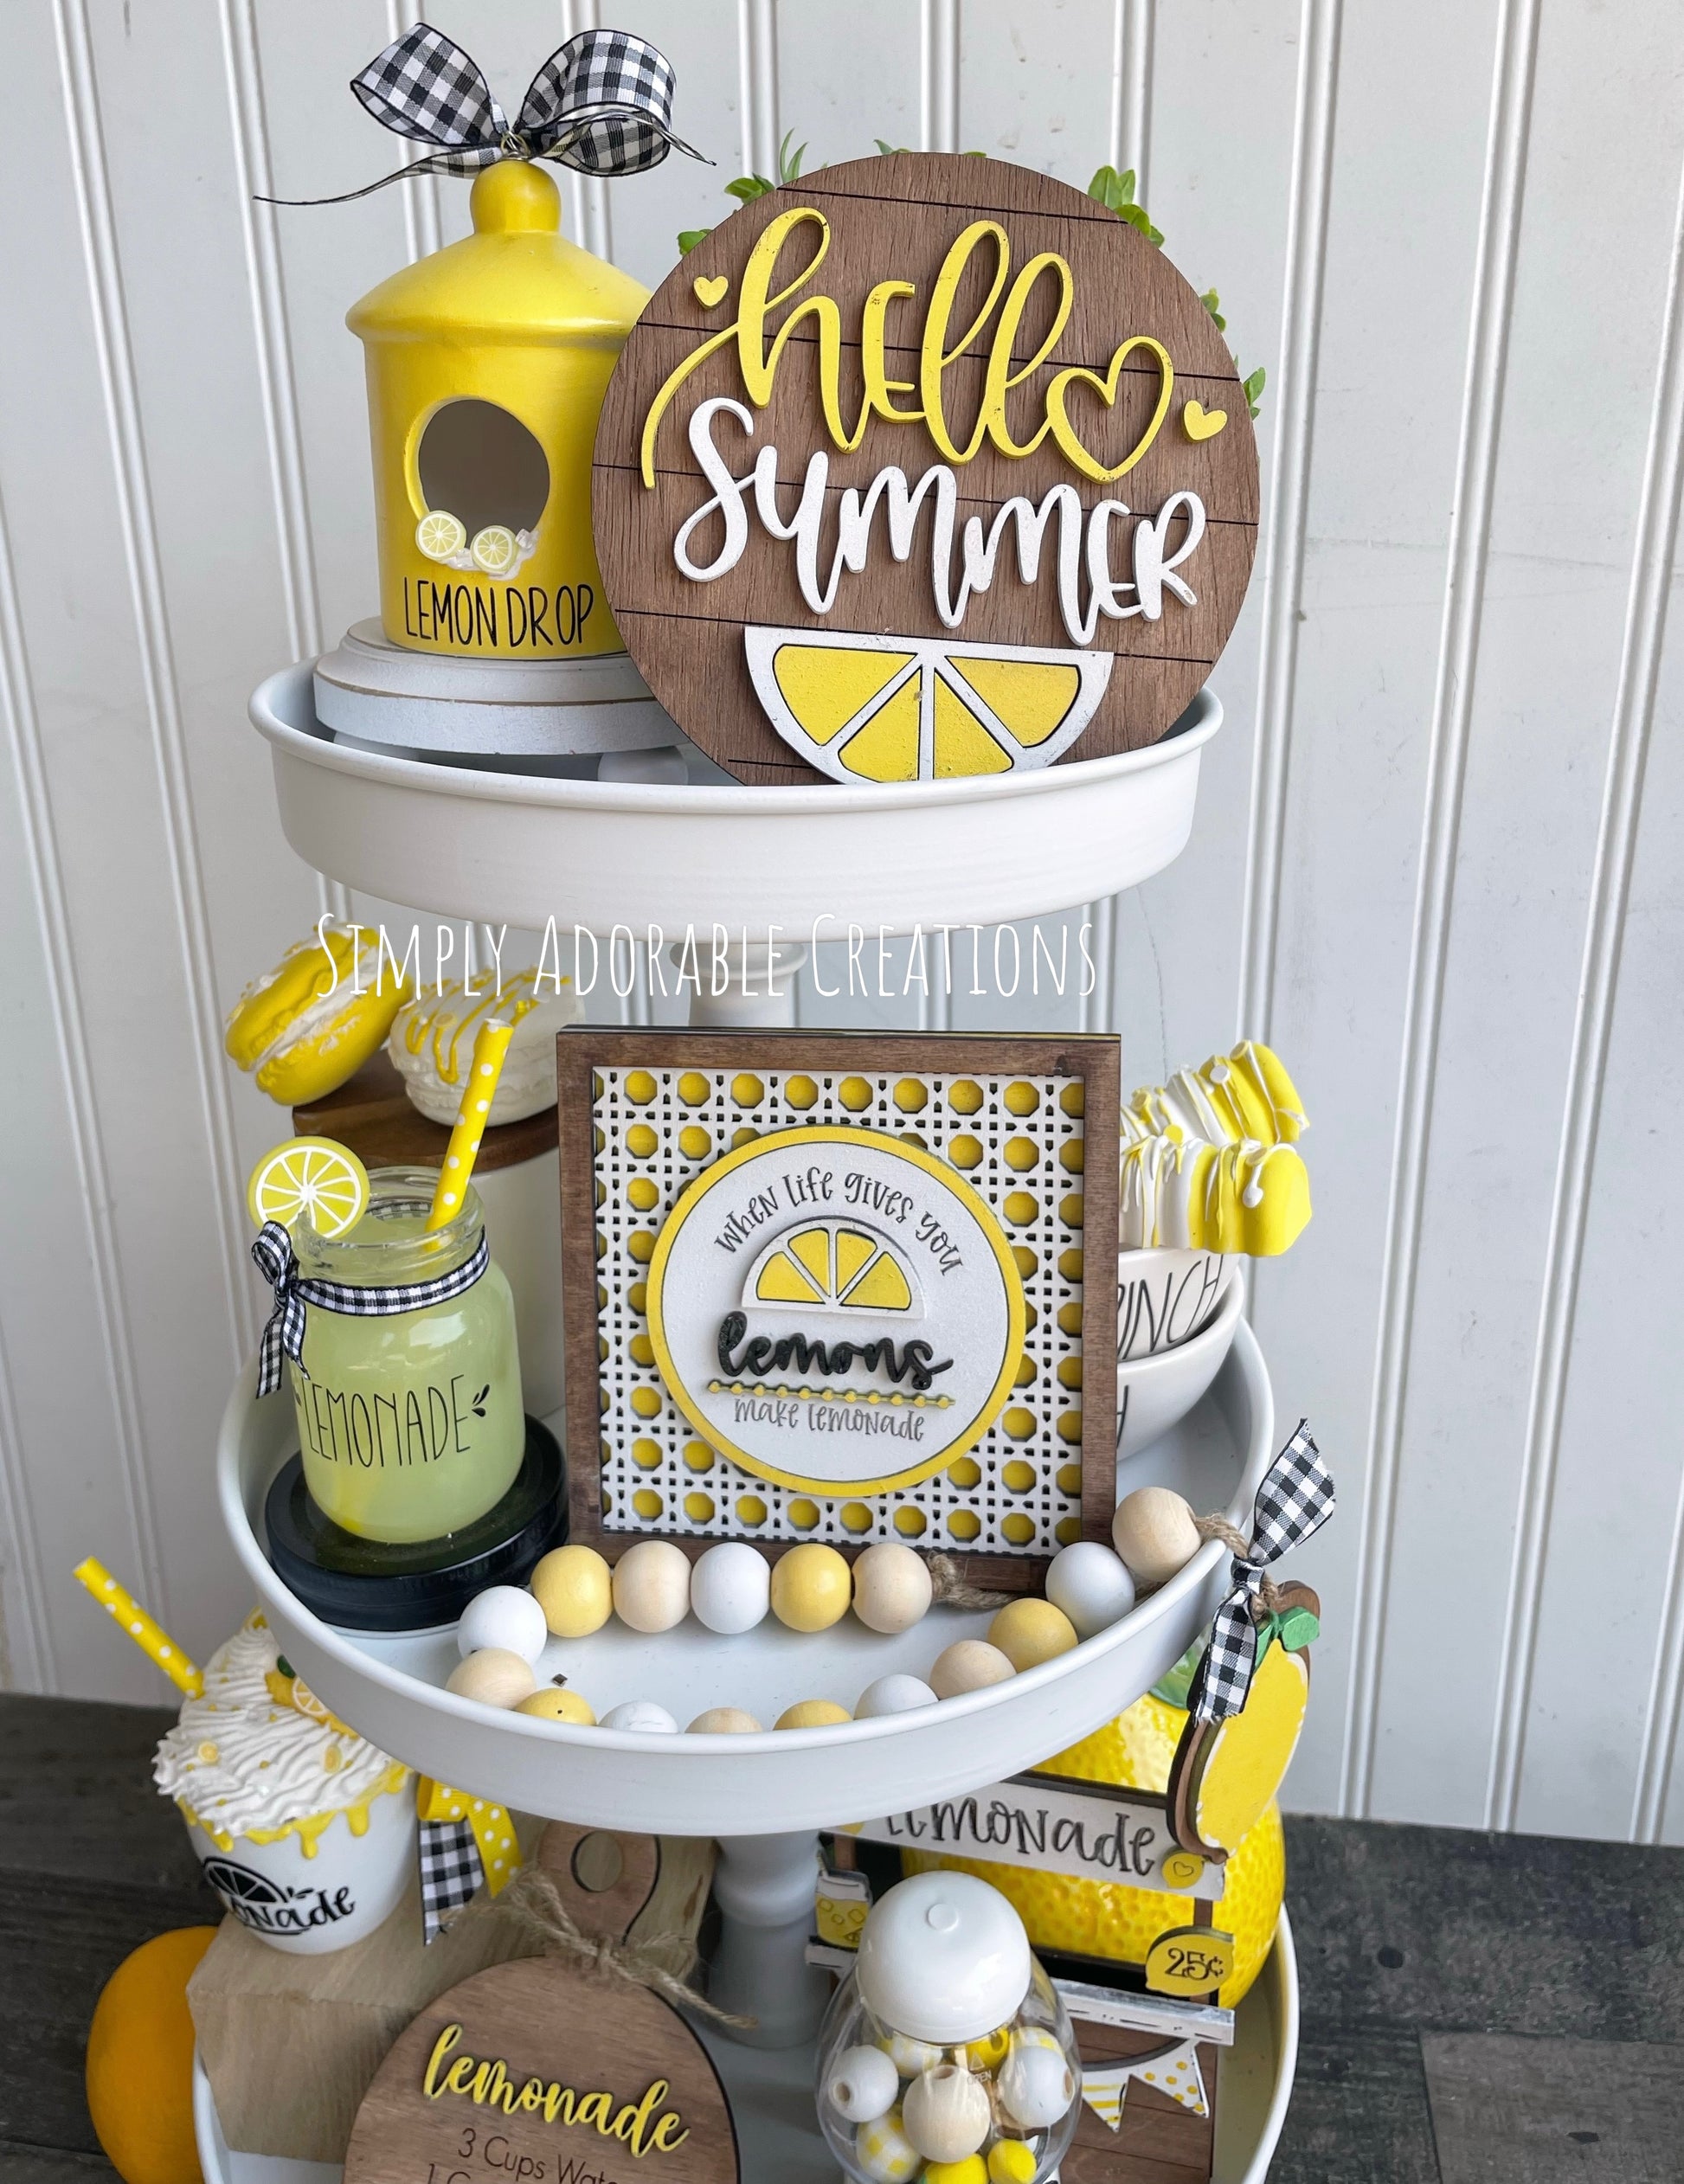 QUEEN BEE HONEY BEE MINI SIGN TIERED TRAY SPRING SUMMER HOME